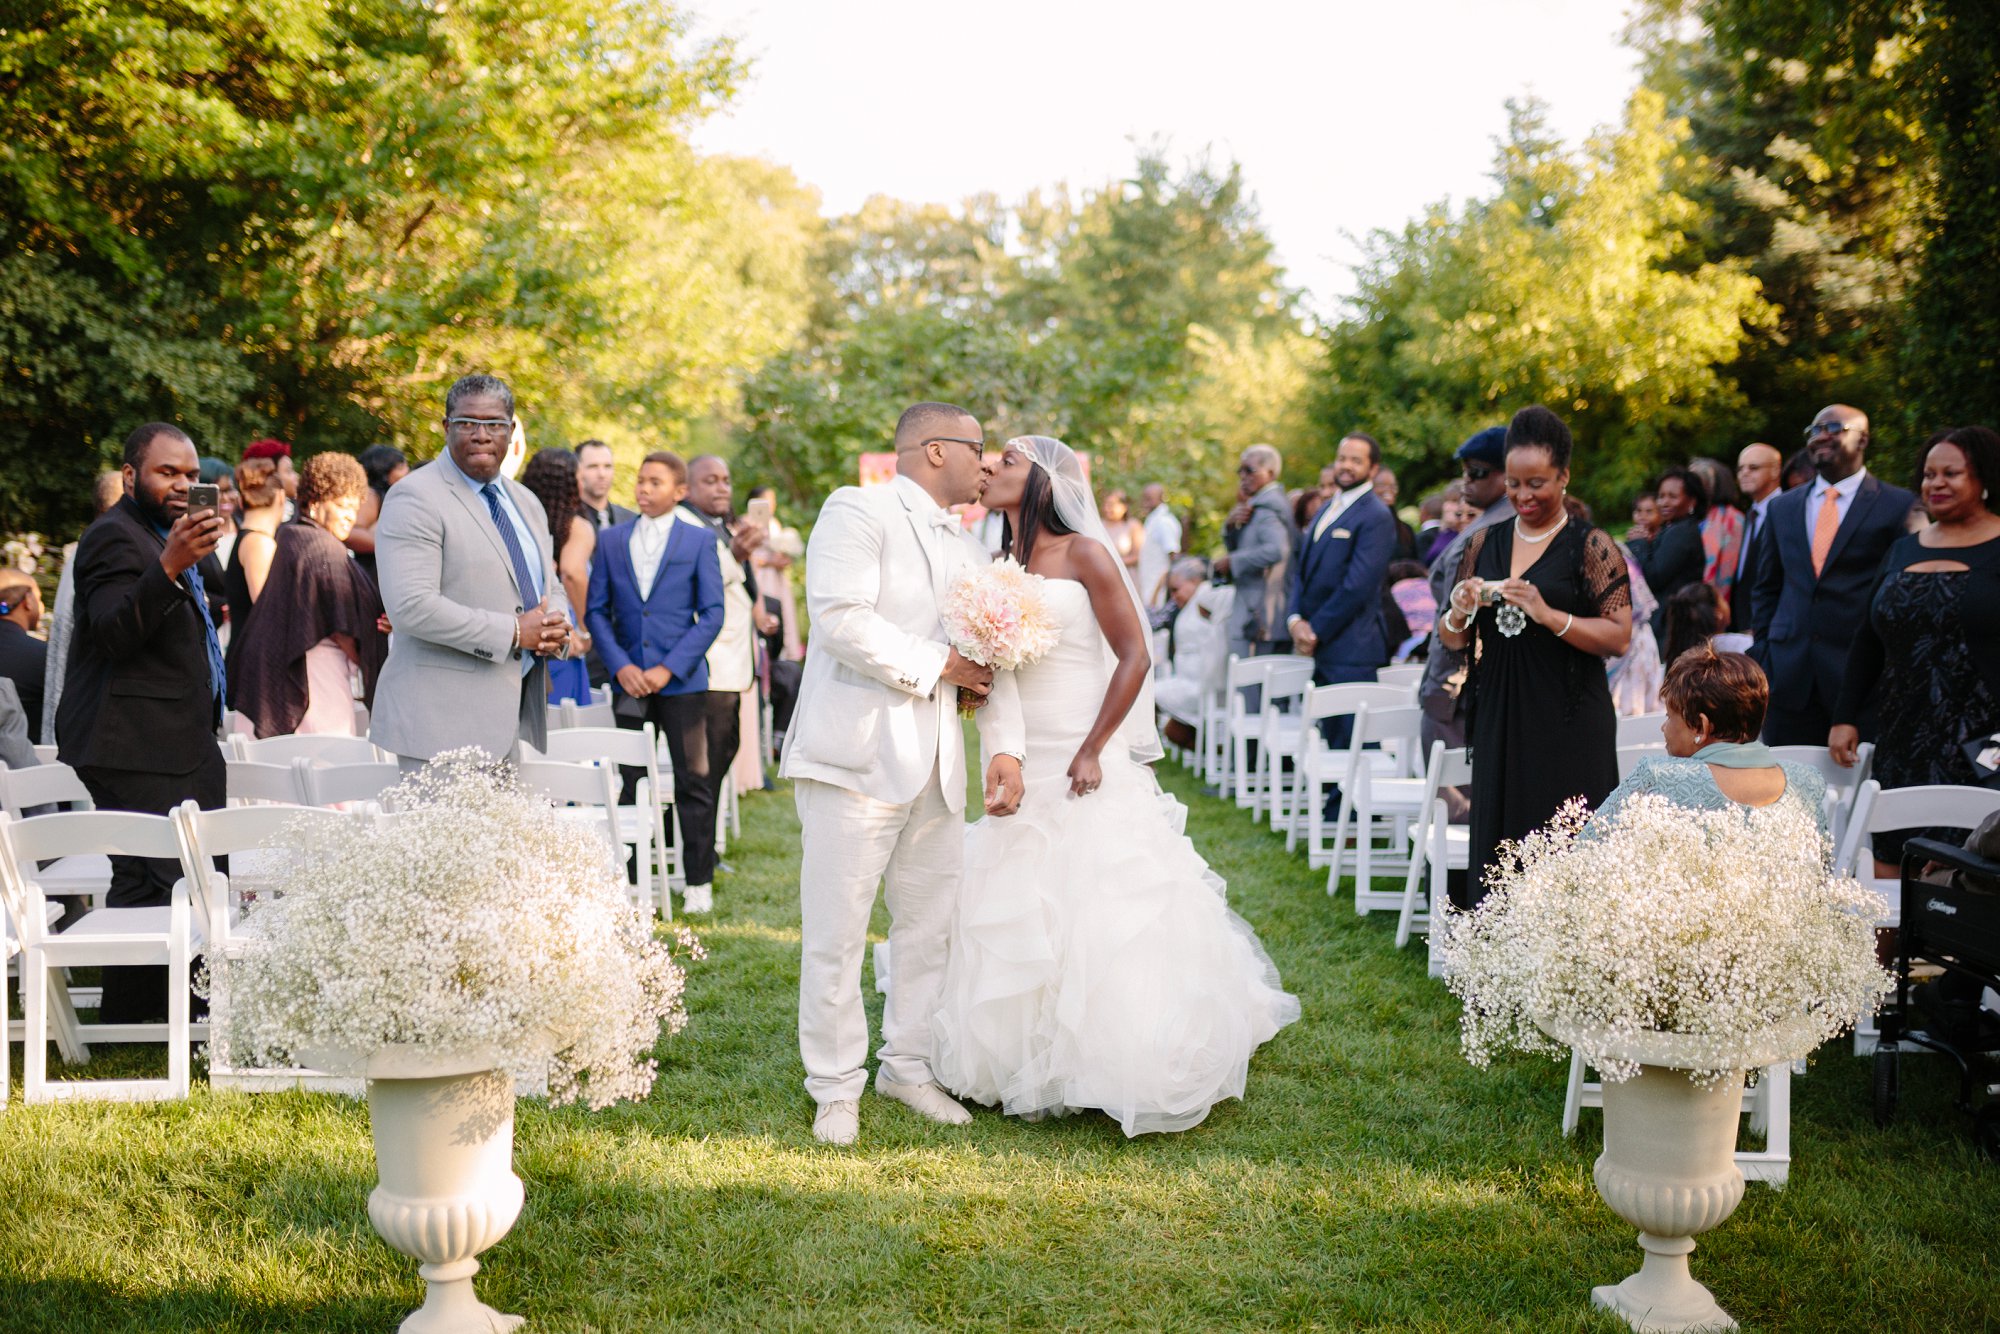 Bride and groom kiss at outdoor wedding ceremony at graydon hall manor